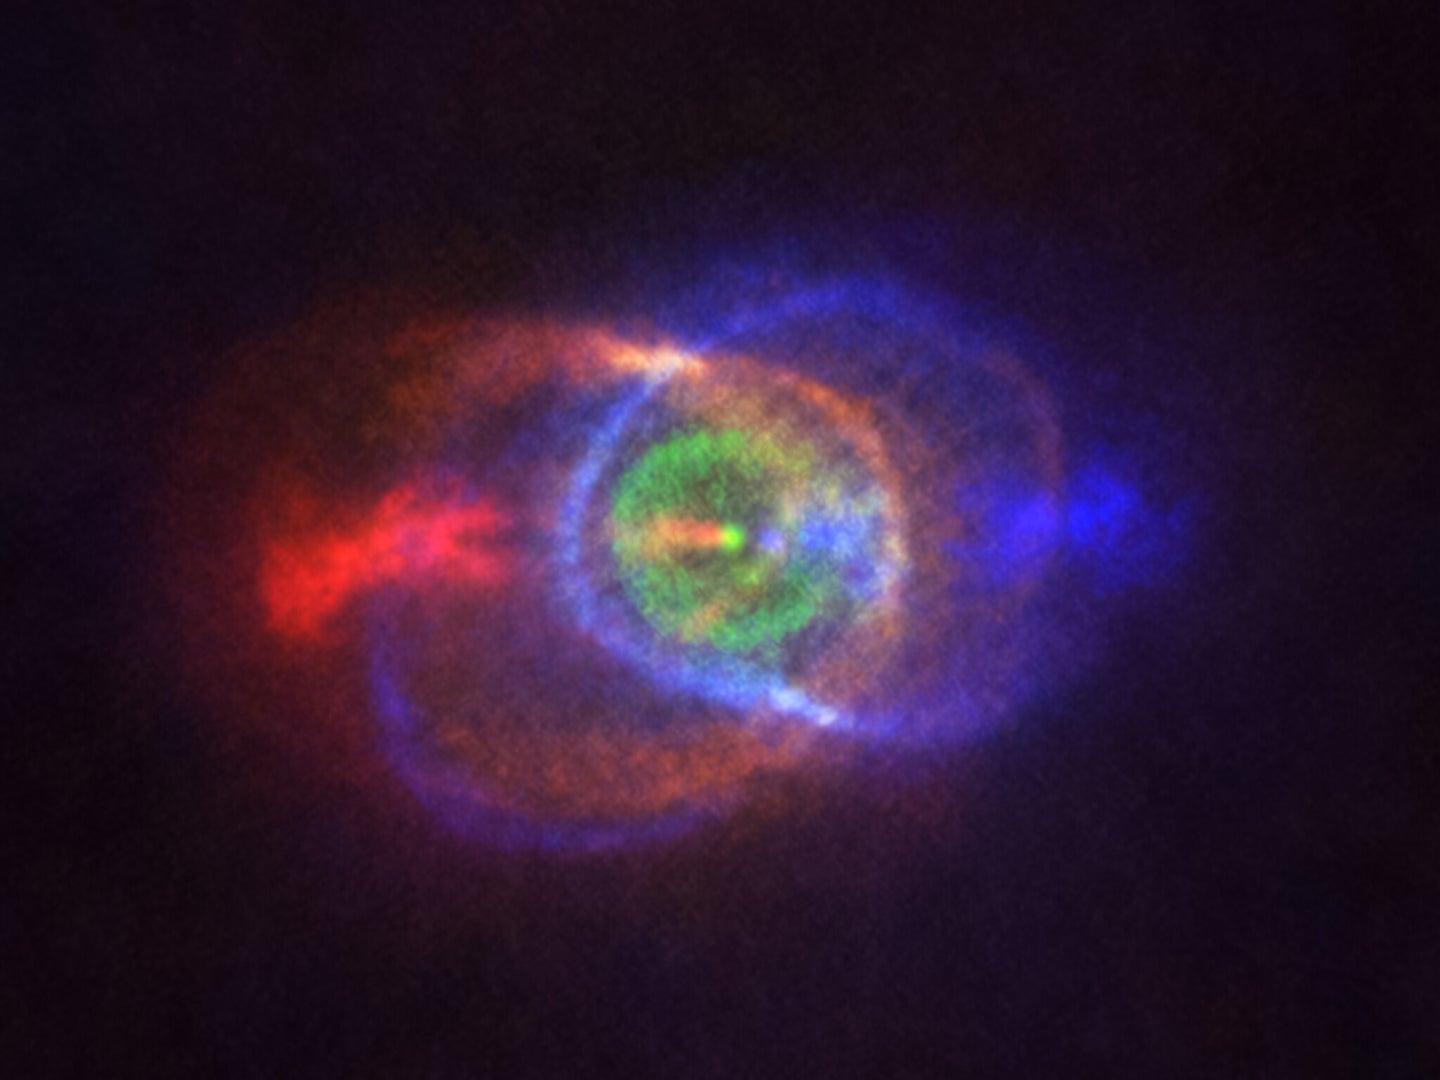 Two stars colliding and making a colorful cloud of gas